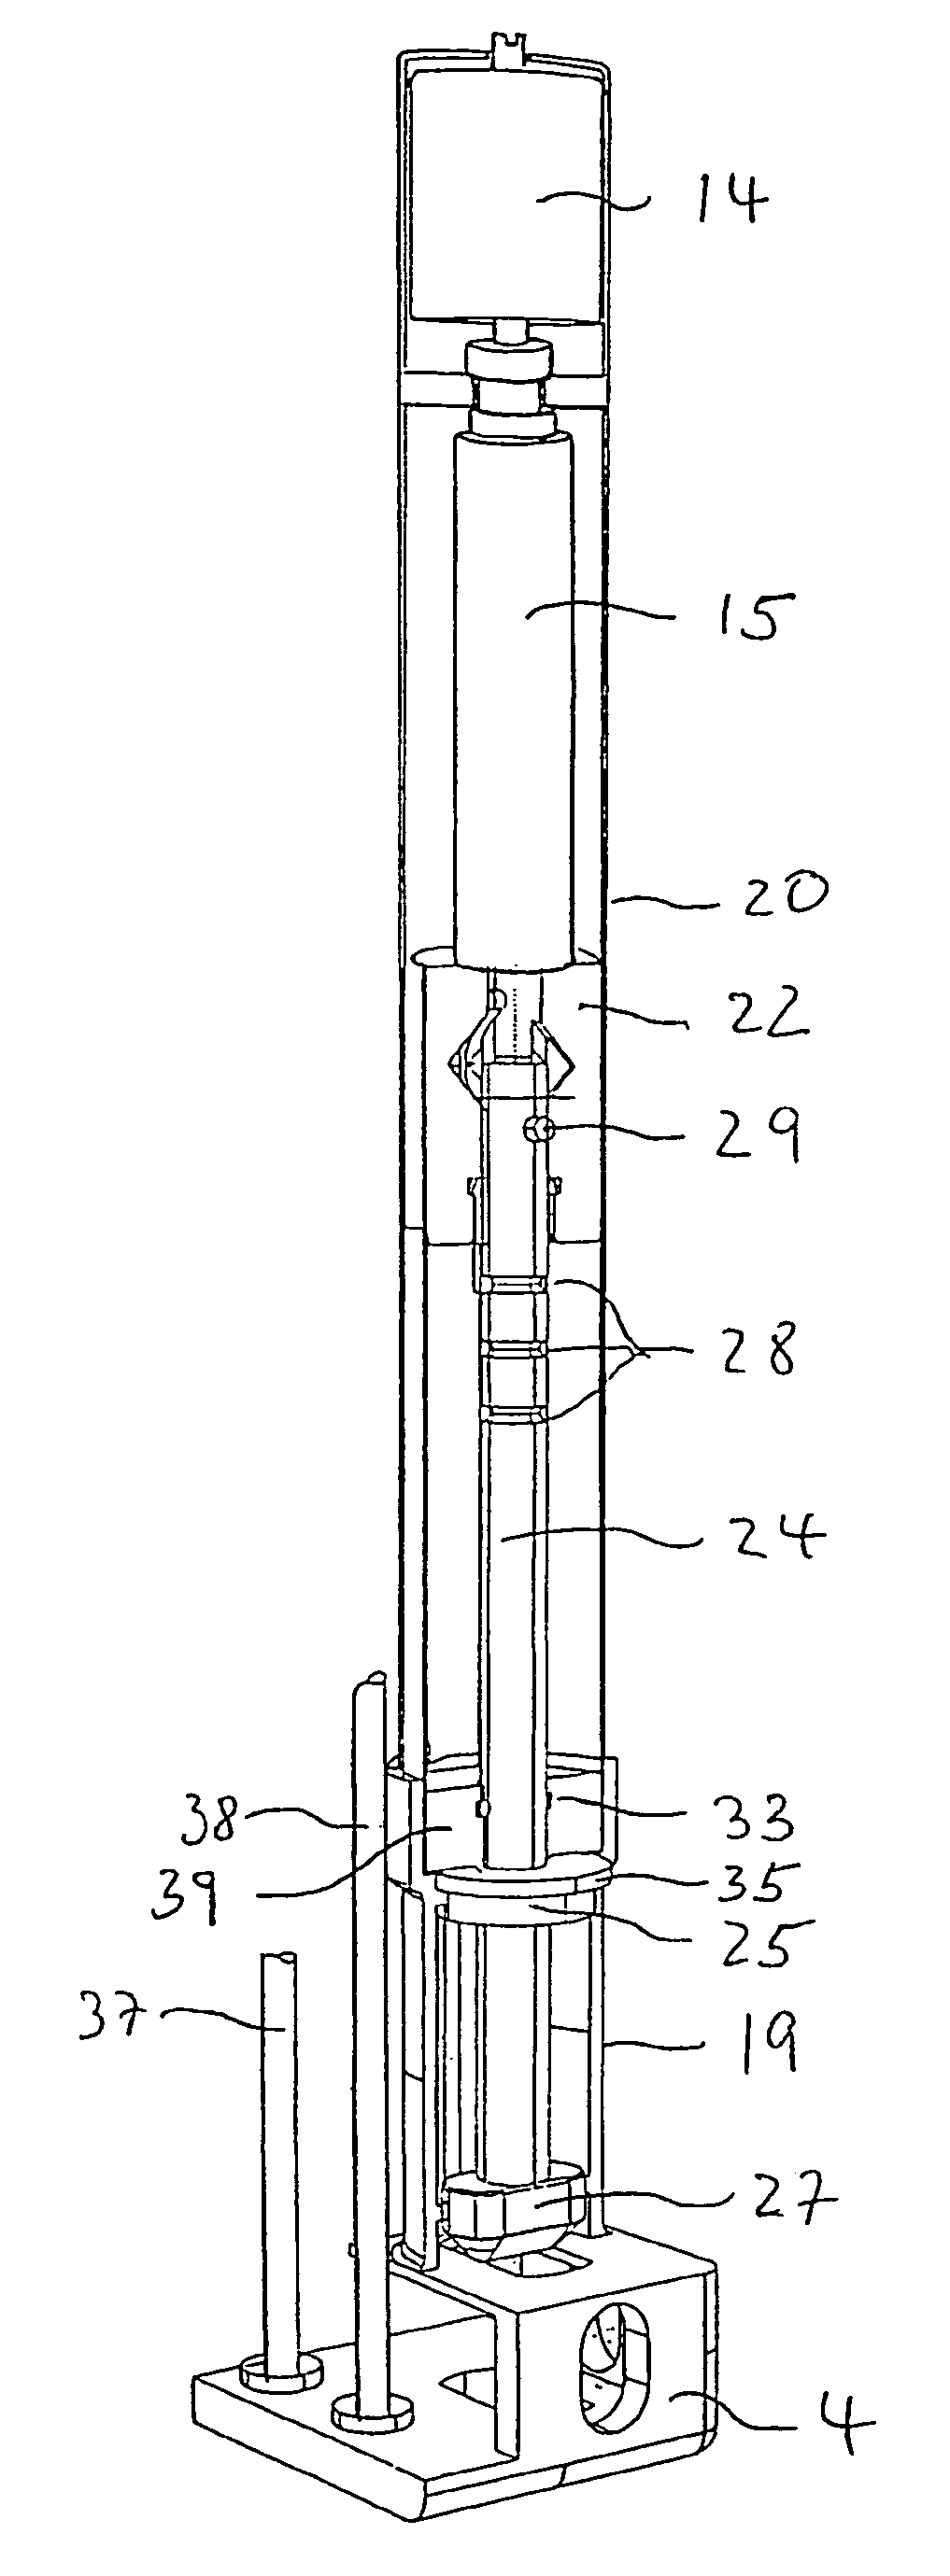 Container comprising an electrically driven interlocking mechanism